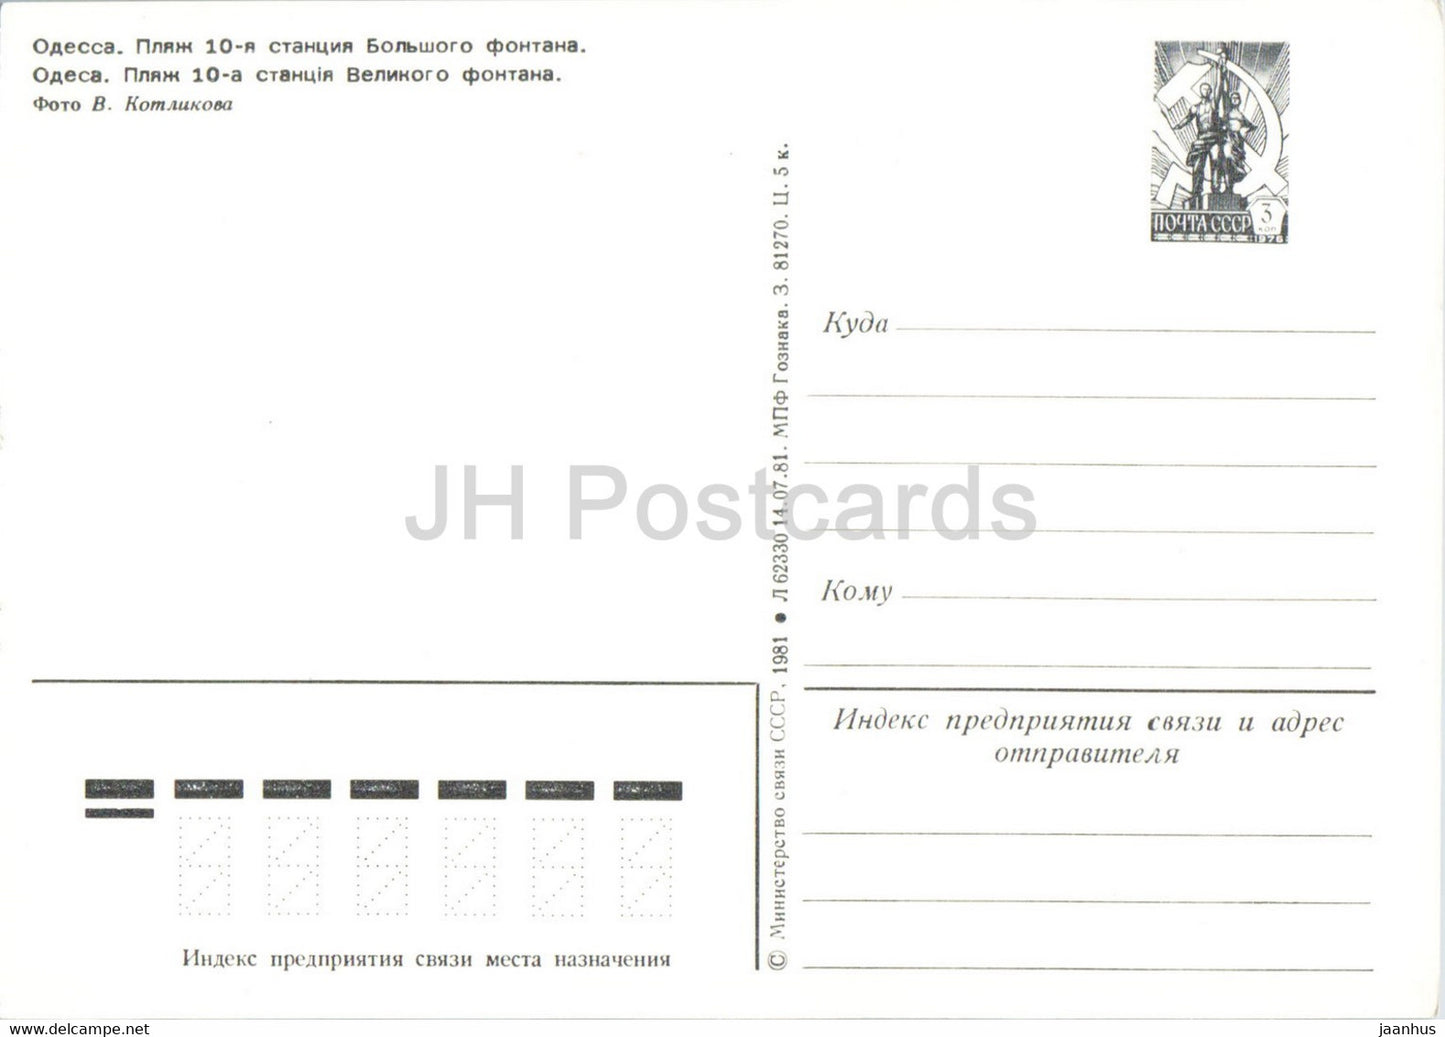 Odessa - Beach of the 10th station of Great Fountain - postal stationery - 1981 - Ukraine USSR - unused